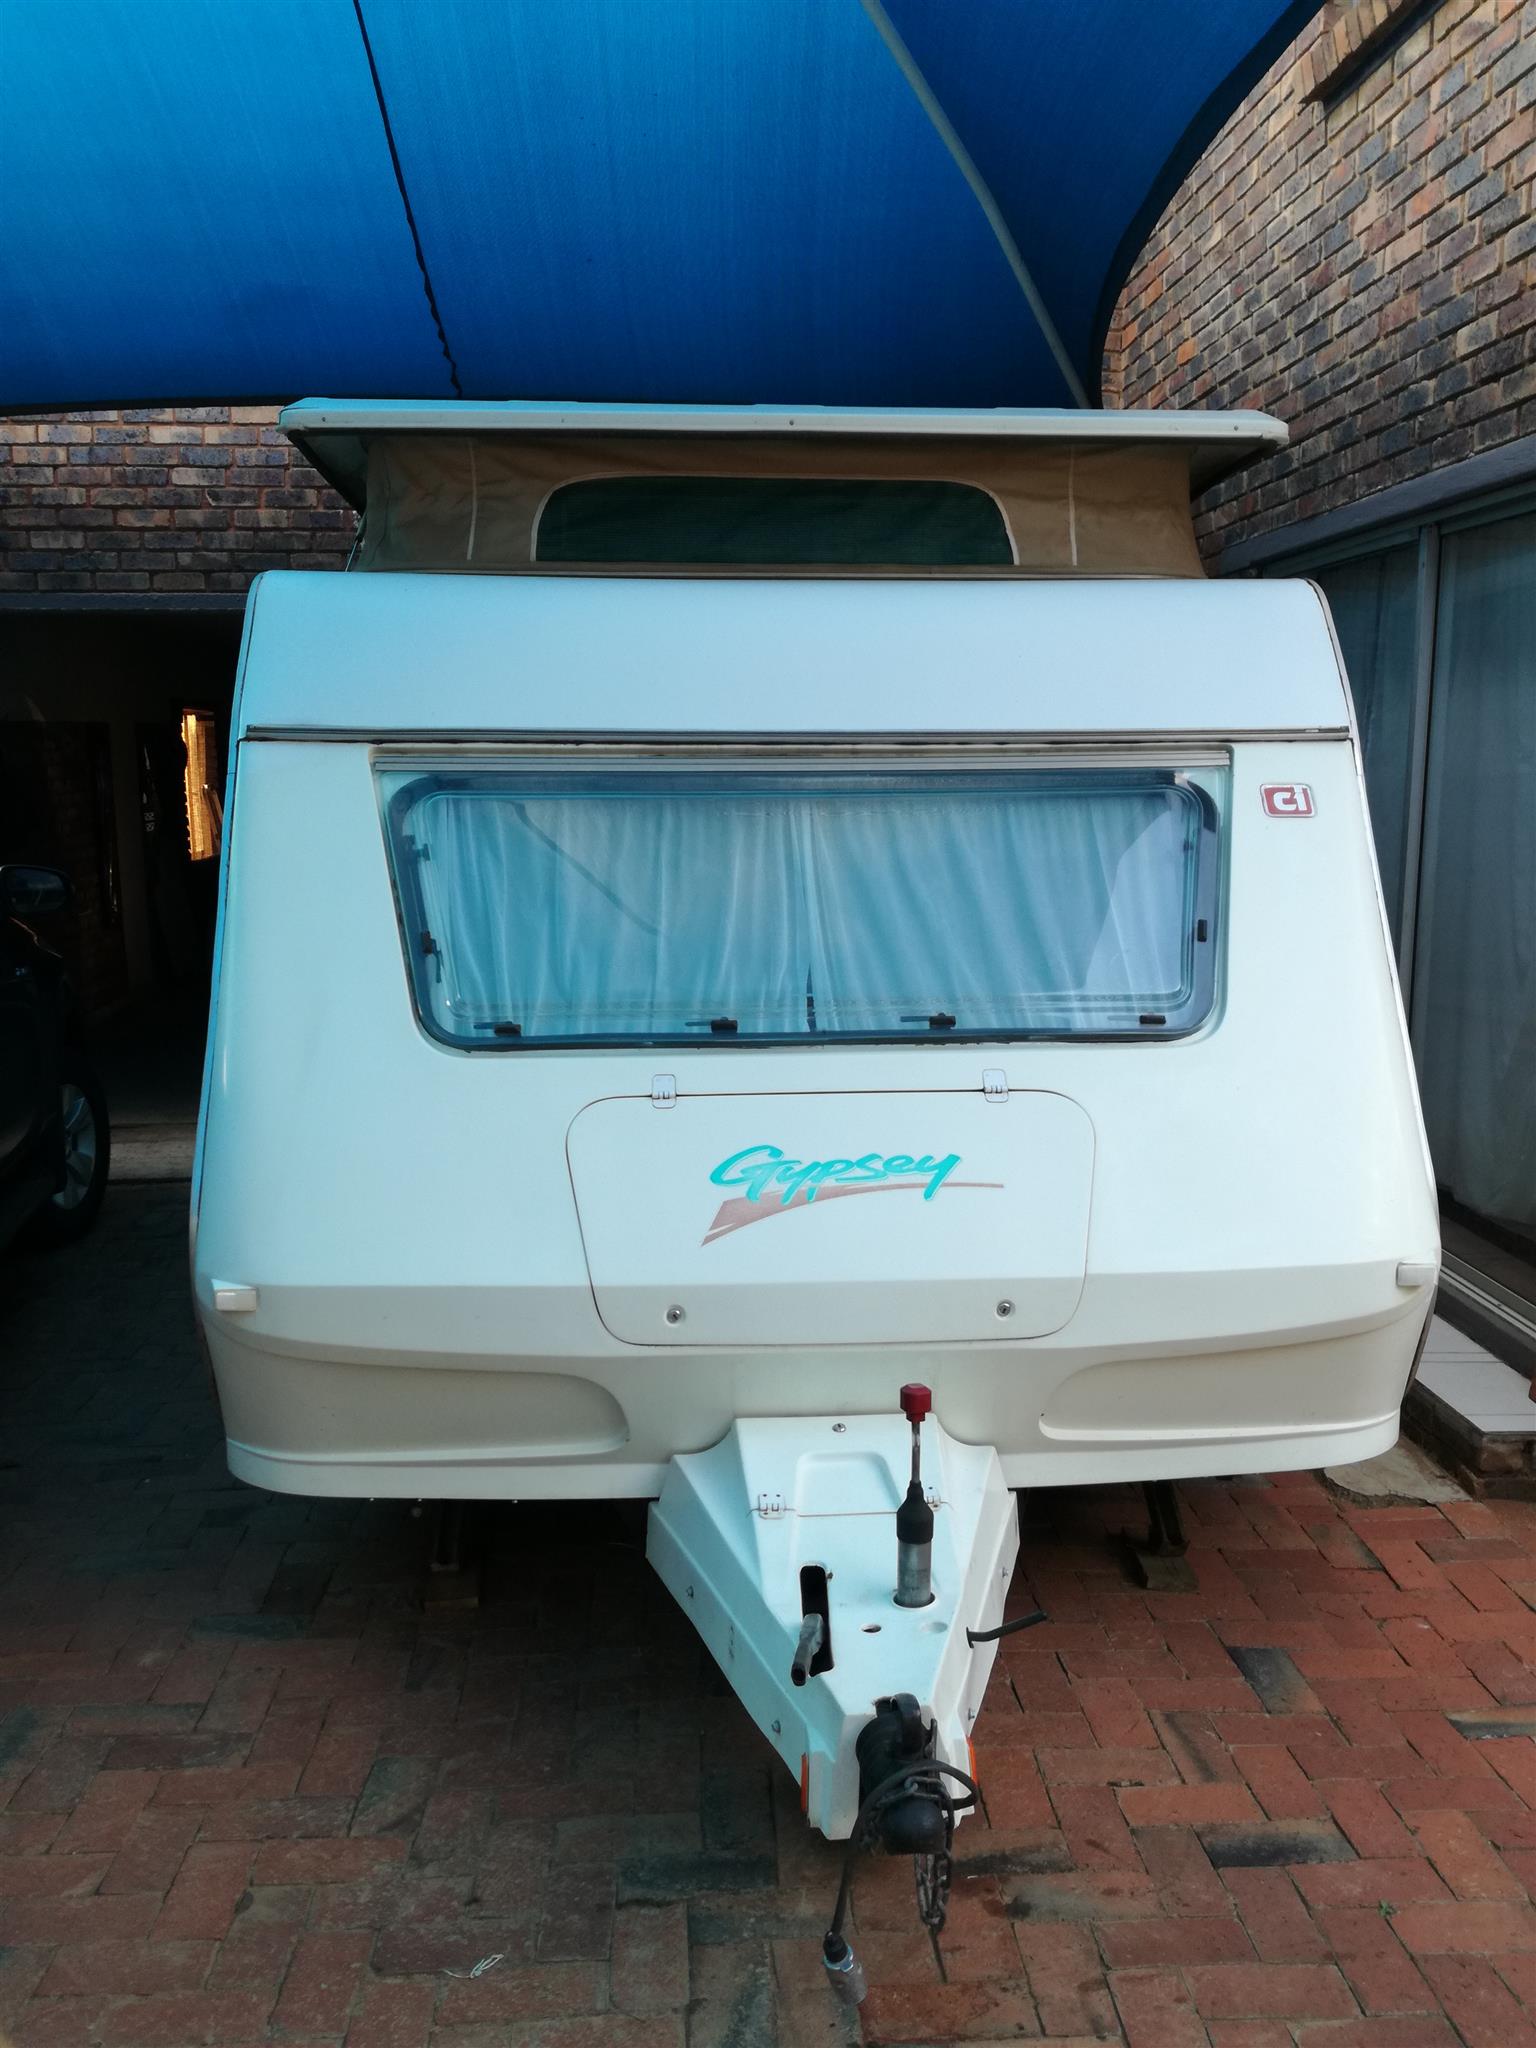 Gypsy Raen D 1997 model Revamp done on interior New mattress Bigger Fridge Very good condition New Tyres and Rims Ready for camping All papers up to date